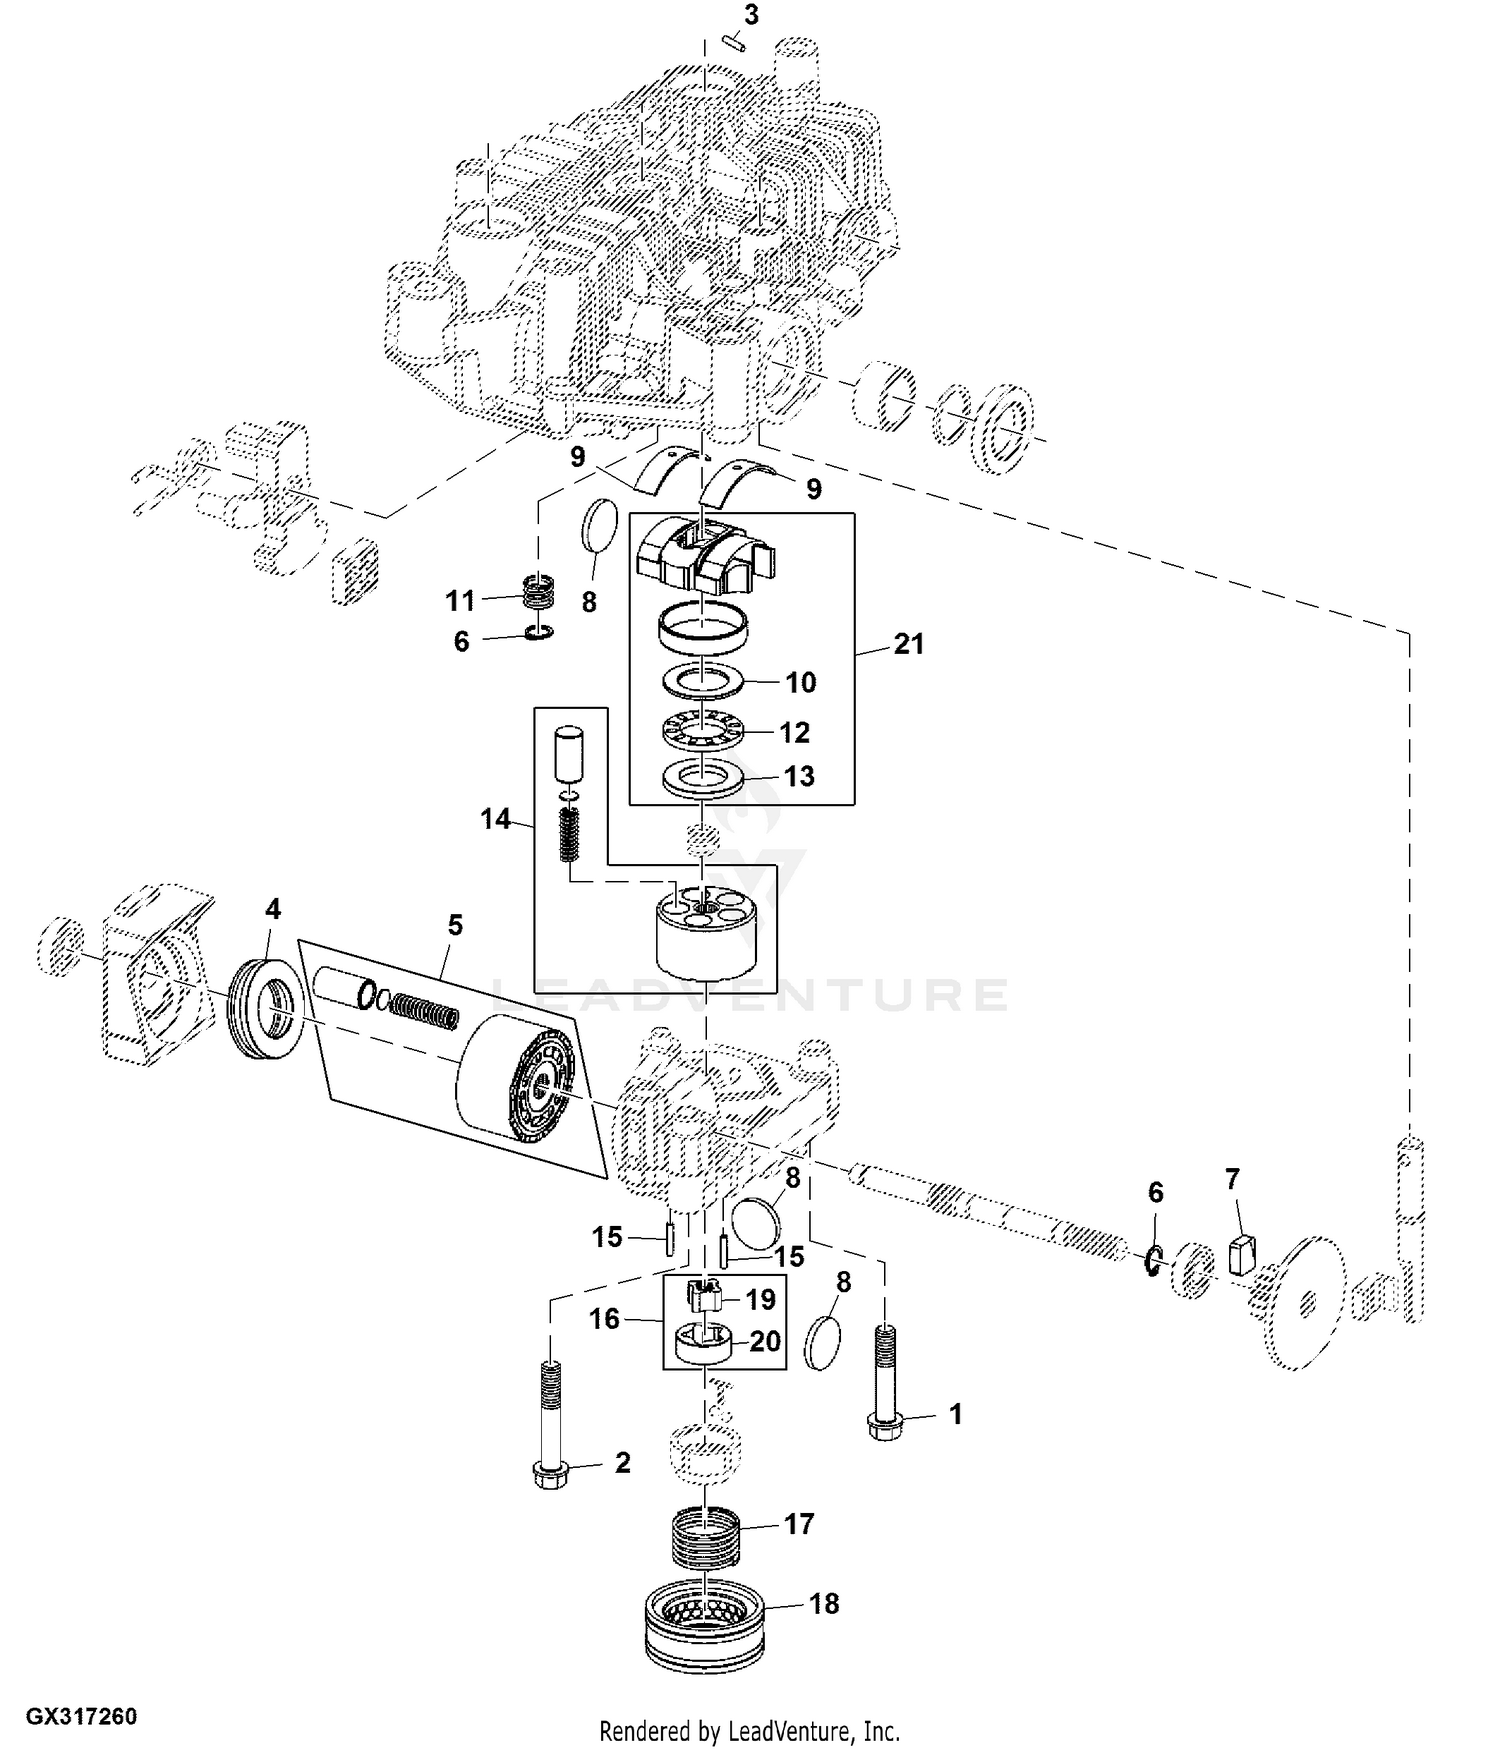 John Deere Z425 Wiring Diagram Printable Form, Templates and Letter